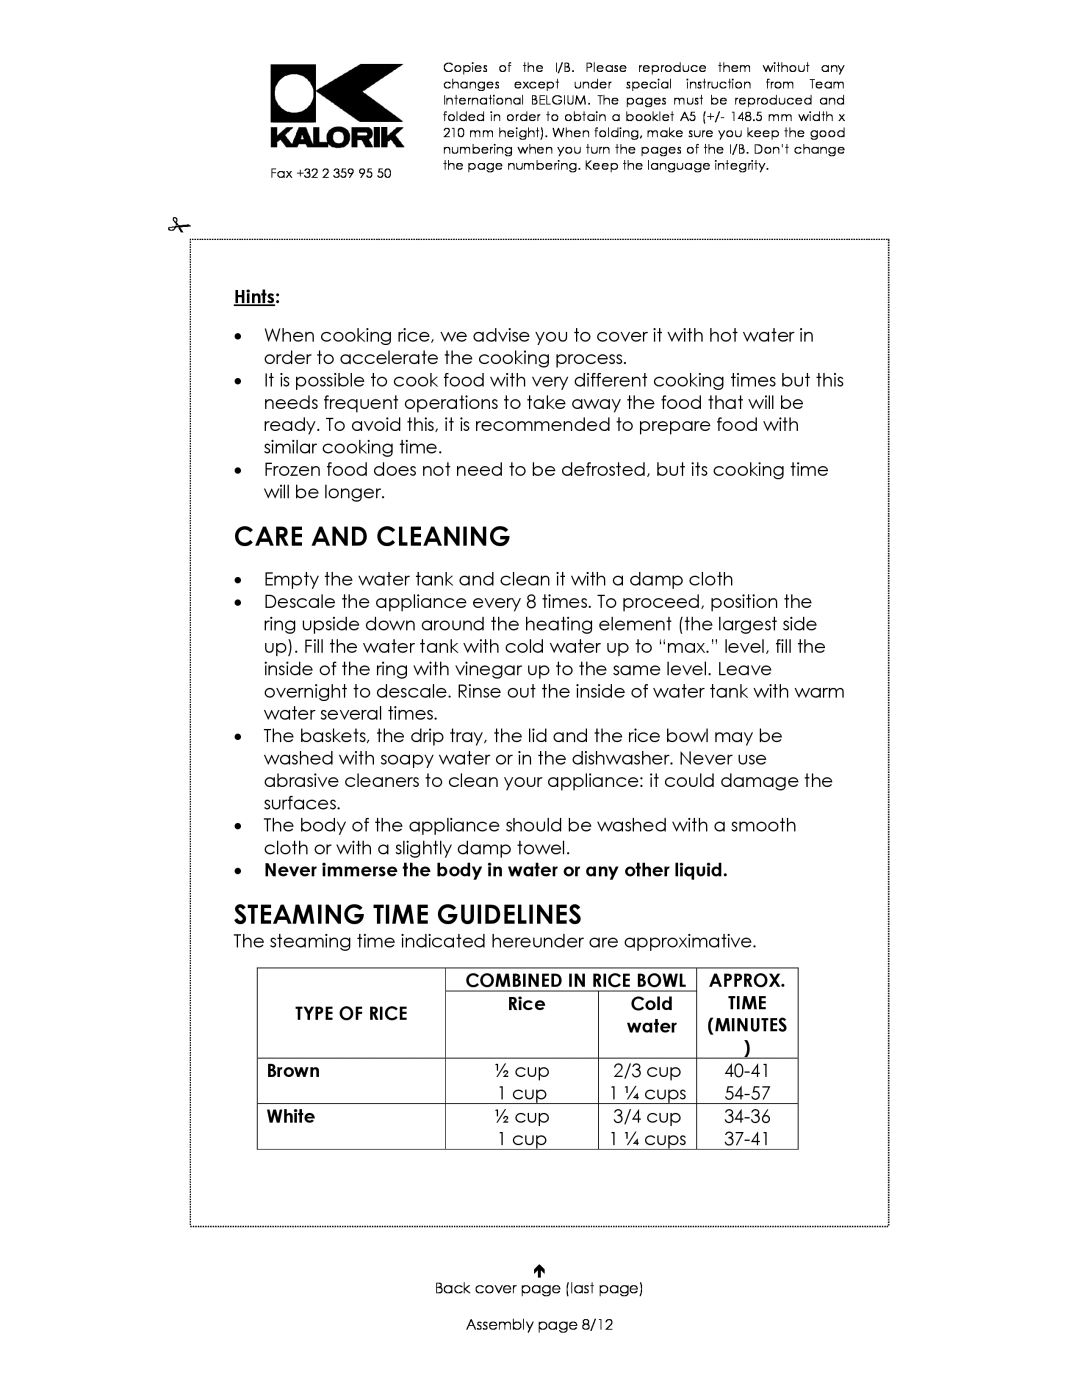 Kalorik USK DG 16271 manual Care And Cleaning, Steaming Time Guidelines, Approx, Minutes, 40-41, 54-57, 34-36, 37-41 